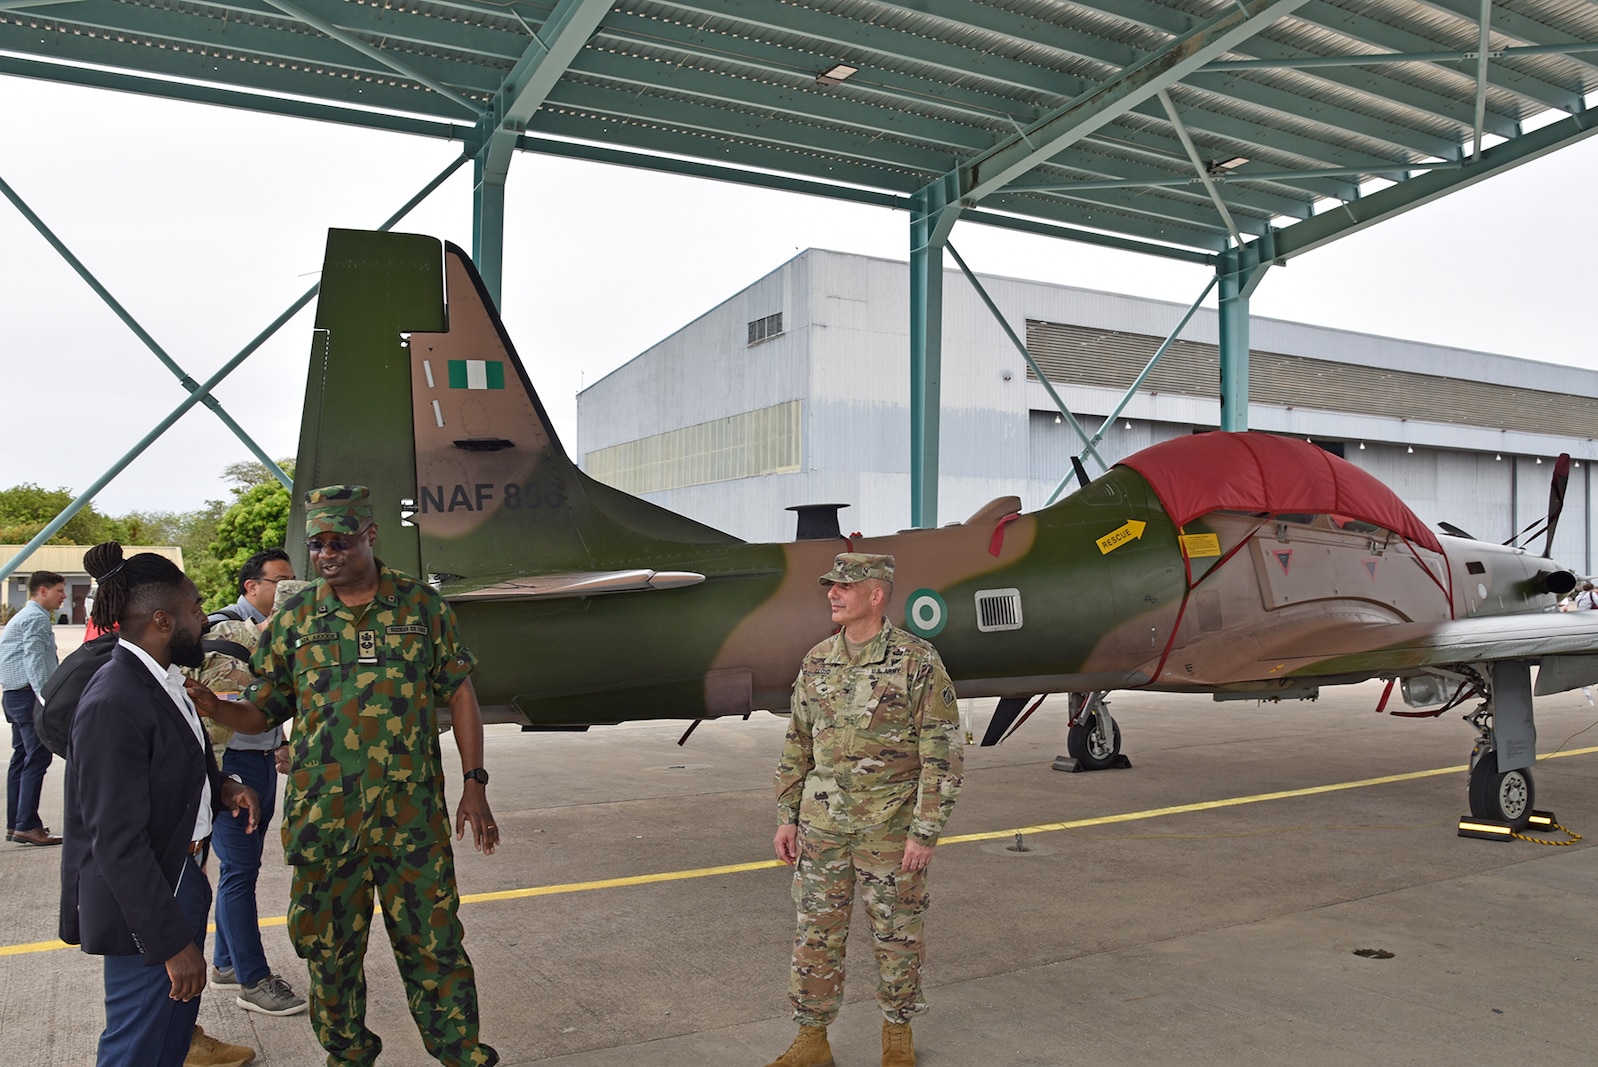 U.S. and Nigerian officials join to celebrate $38 million in Kainji Air Force Base improvements